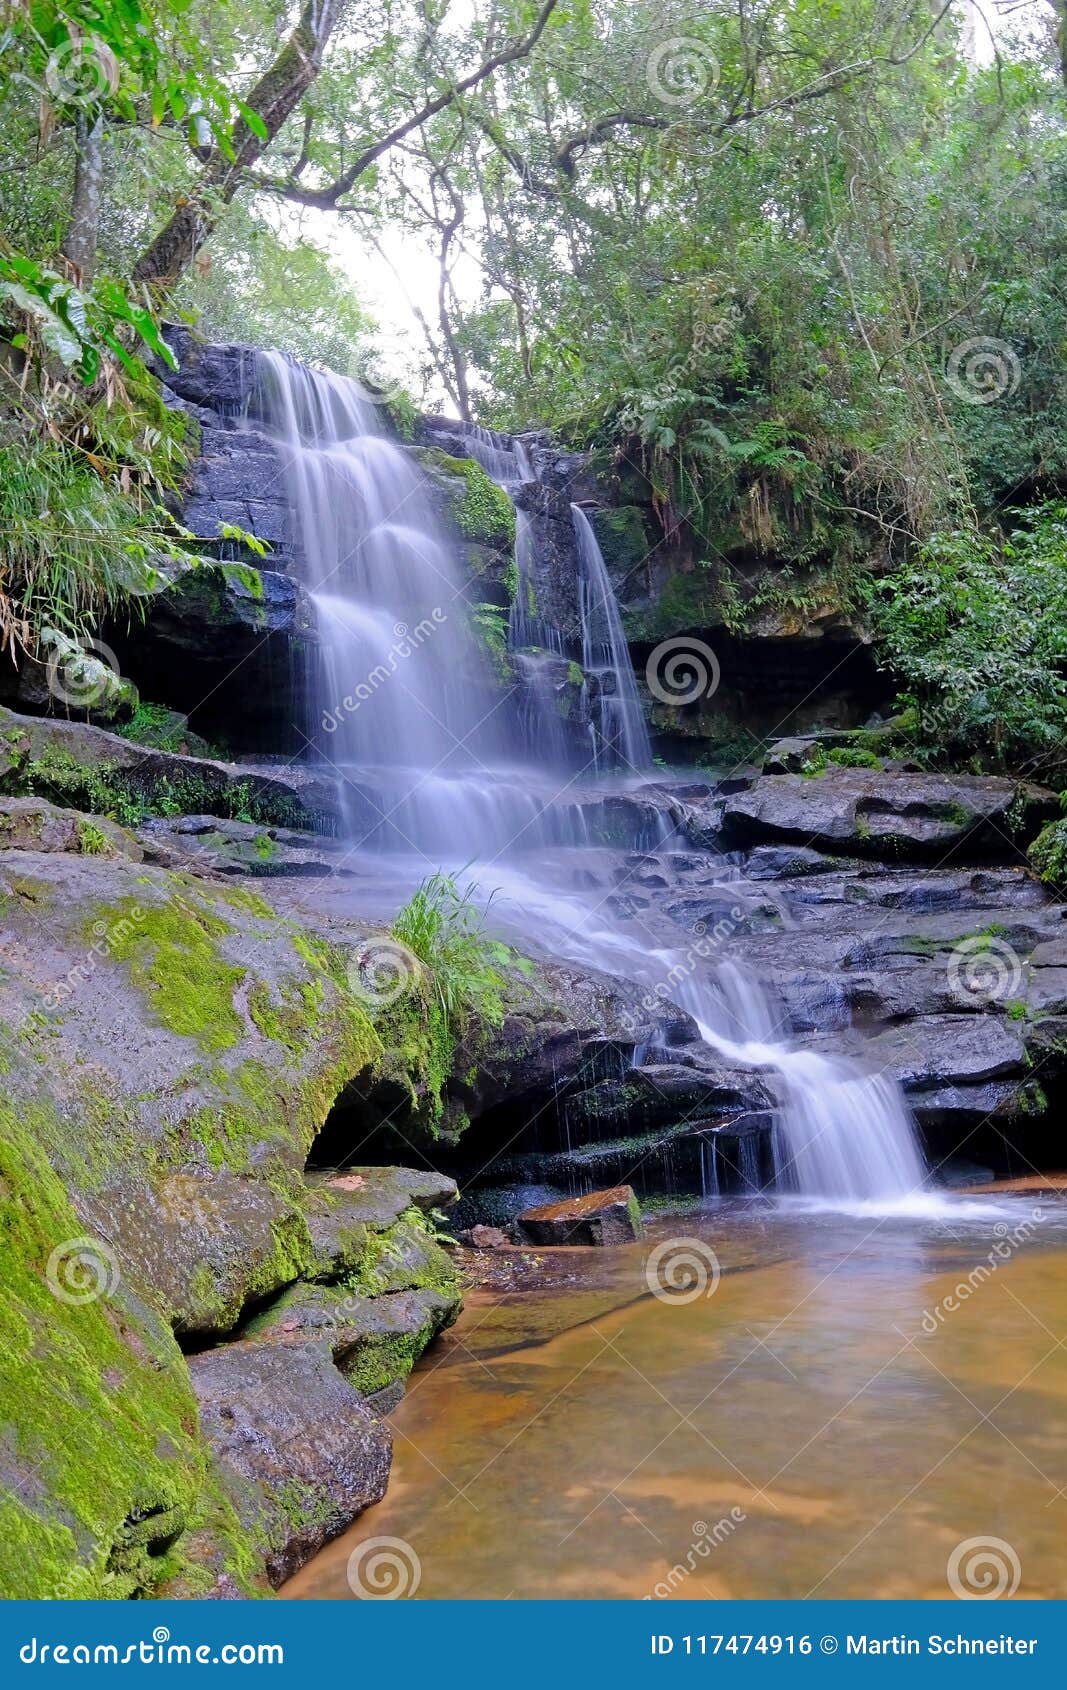 the beautiful guarani waterfall in the rainforest of ybycui national park, paraguay